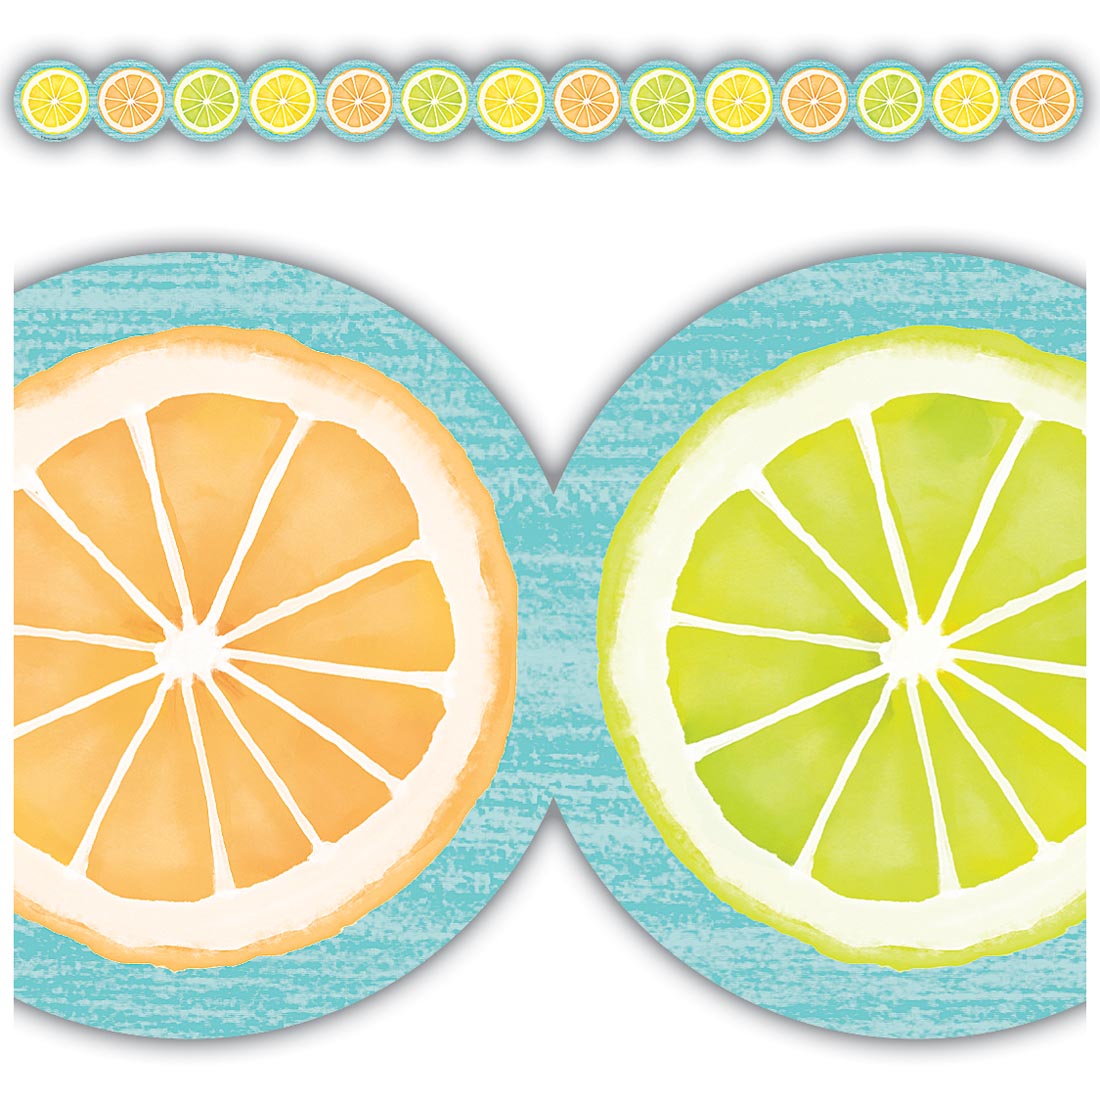 Full view and closeup of the Citrus Slices Die-Cut Border Trim from the Lemon Zest collection by Teacher Created Resources